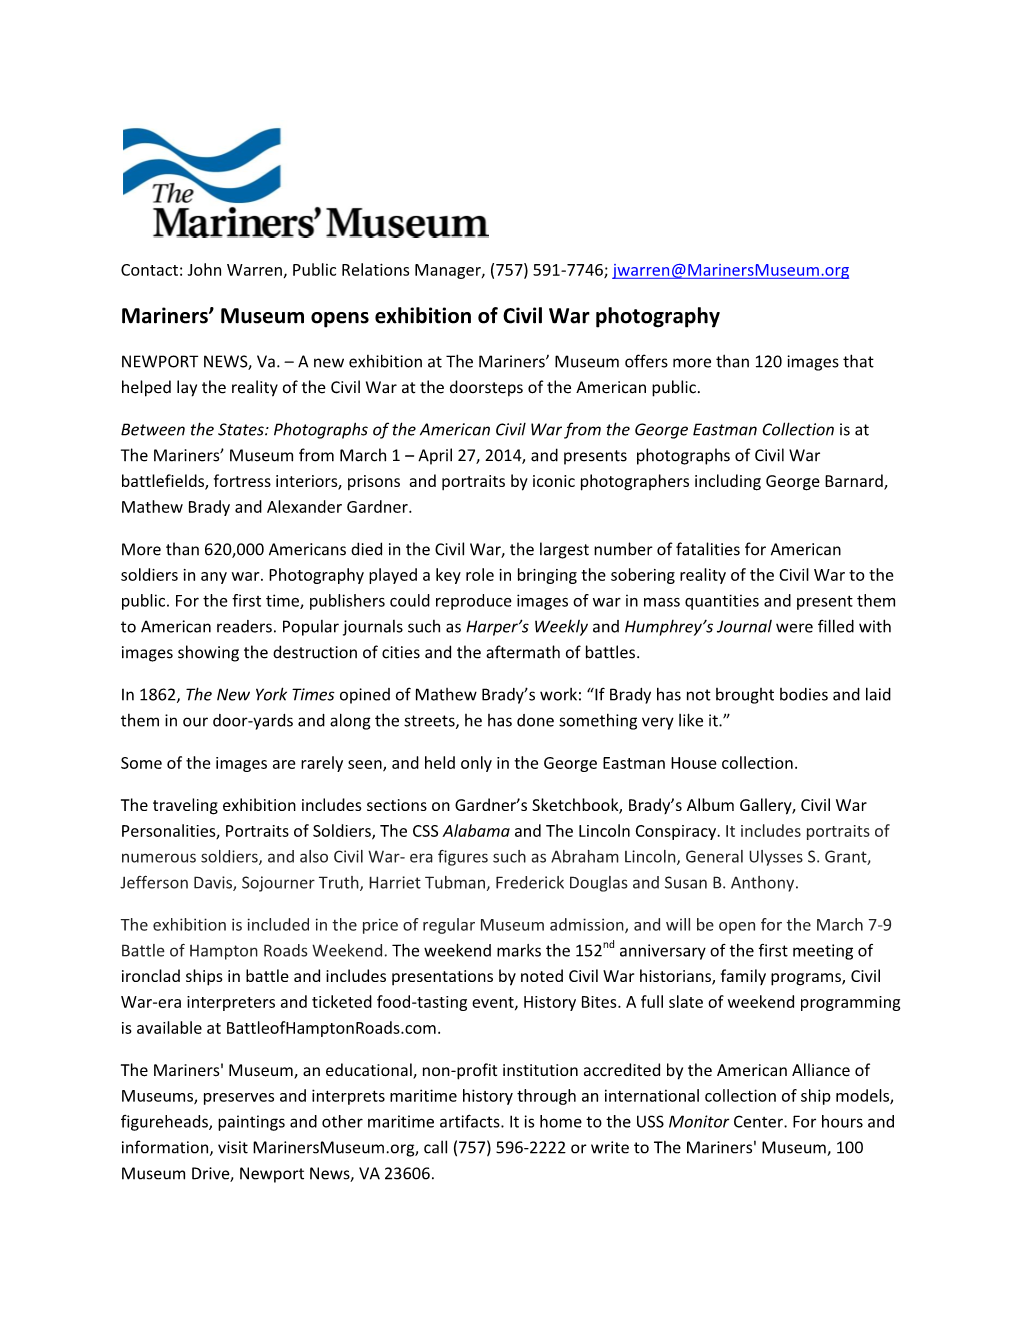 Mariners' Museum Opens Exhibition of Civil War Photography